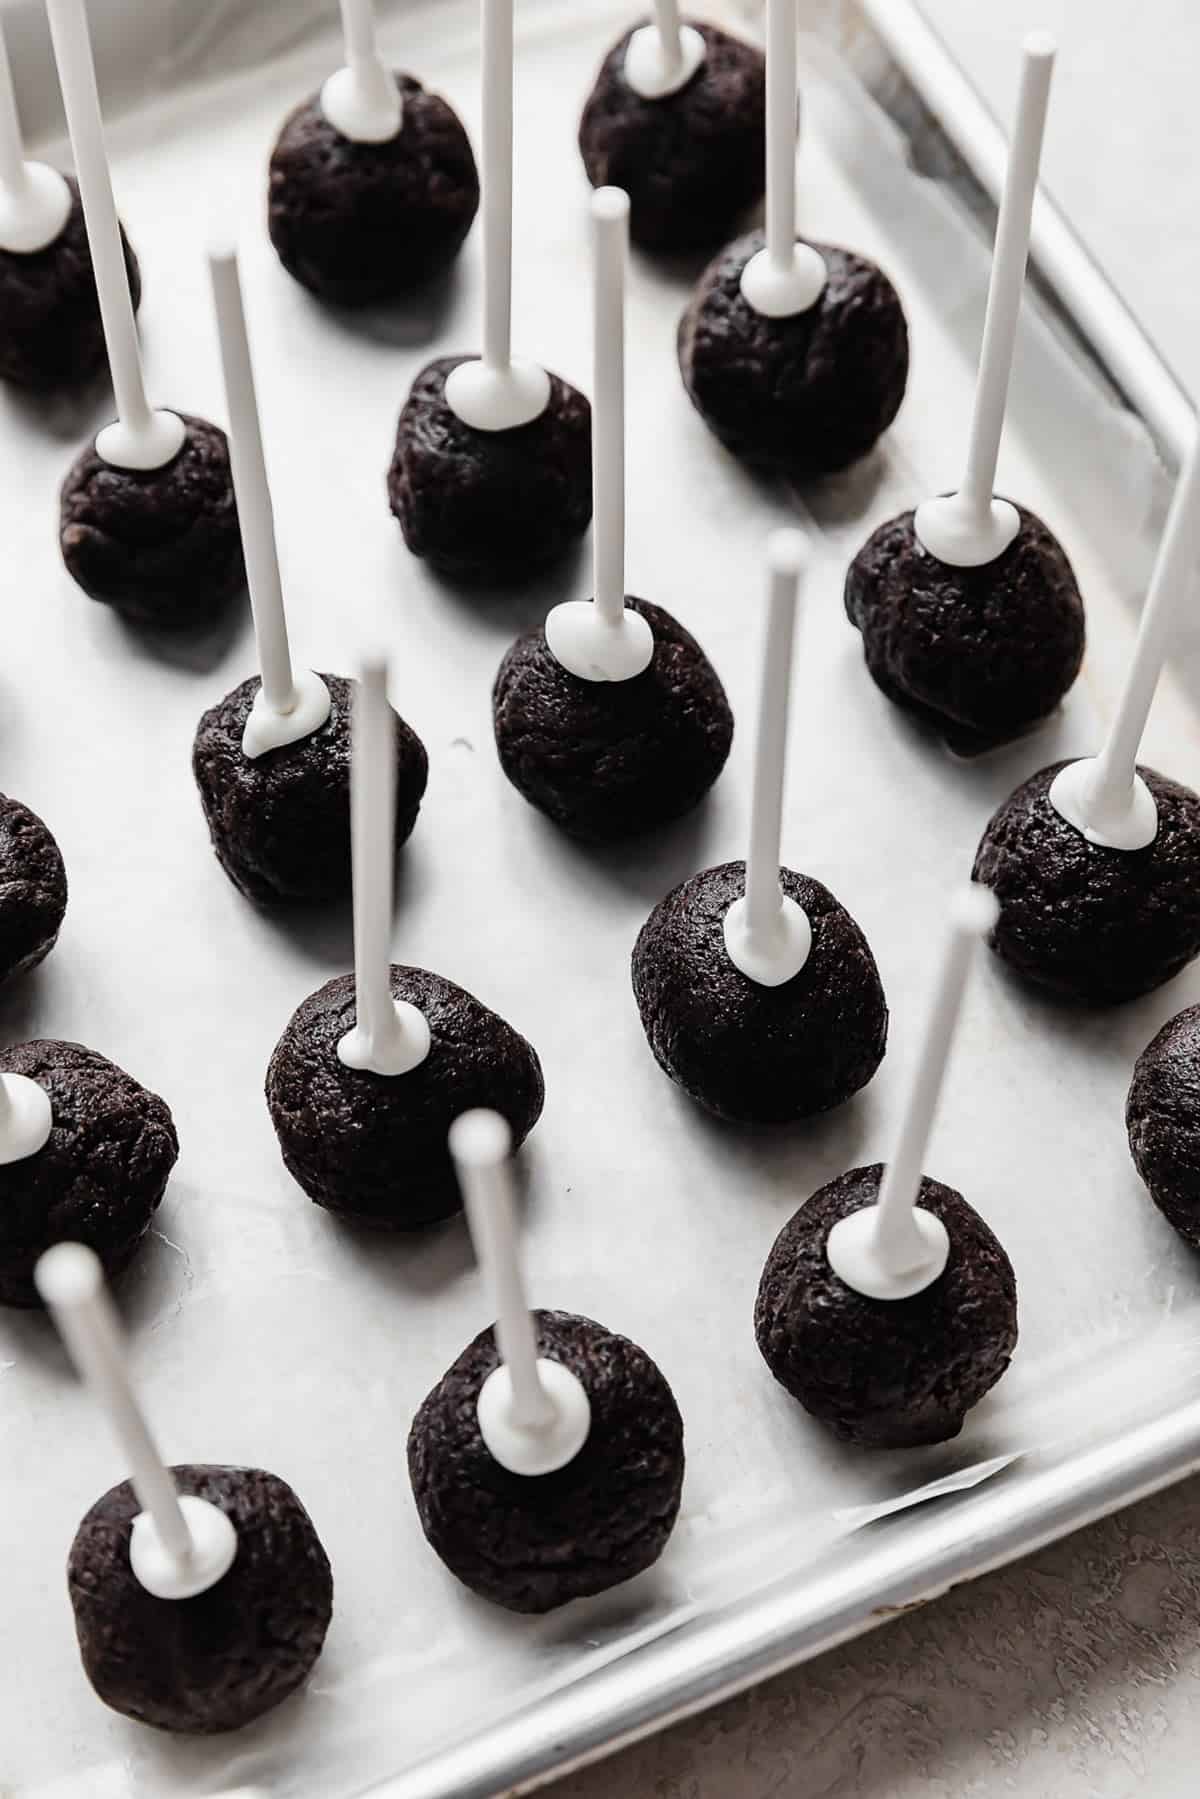 Oreo Cake Pop balls on a parchment lined baking sheet with white lollipop sticks in each Oreo pop.